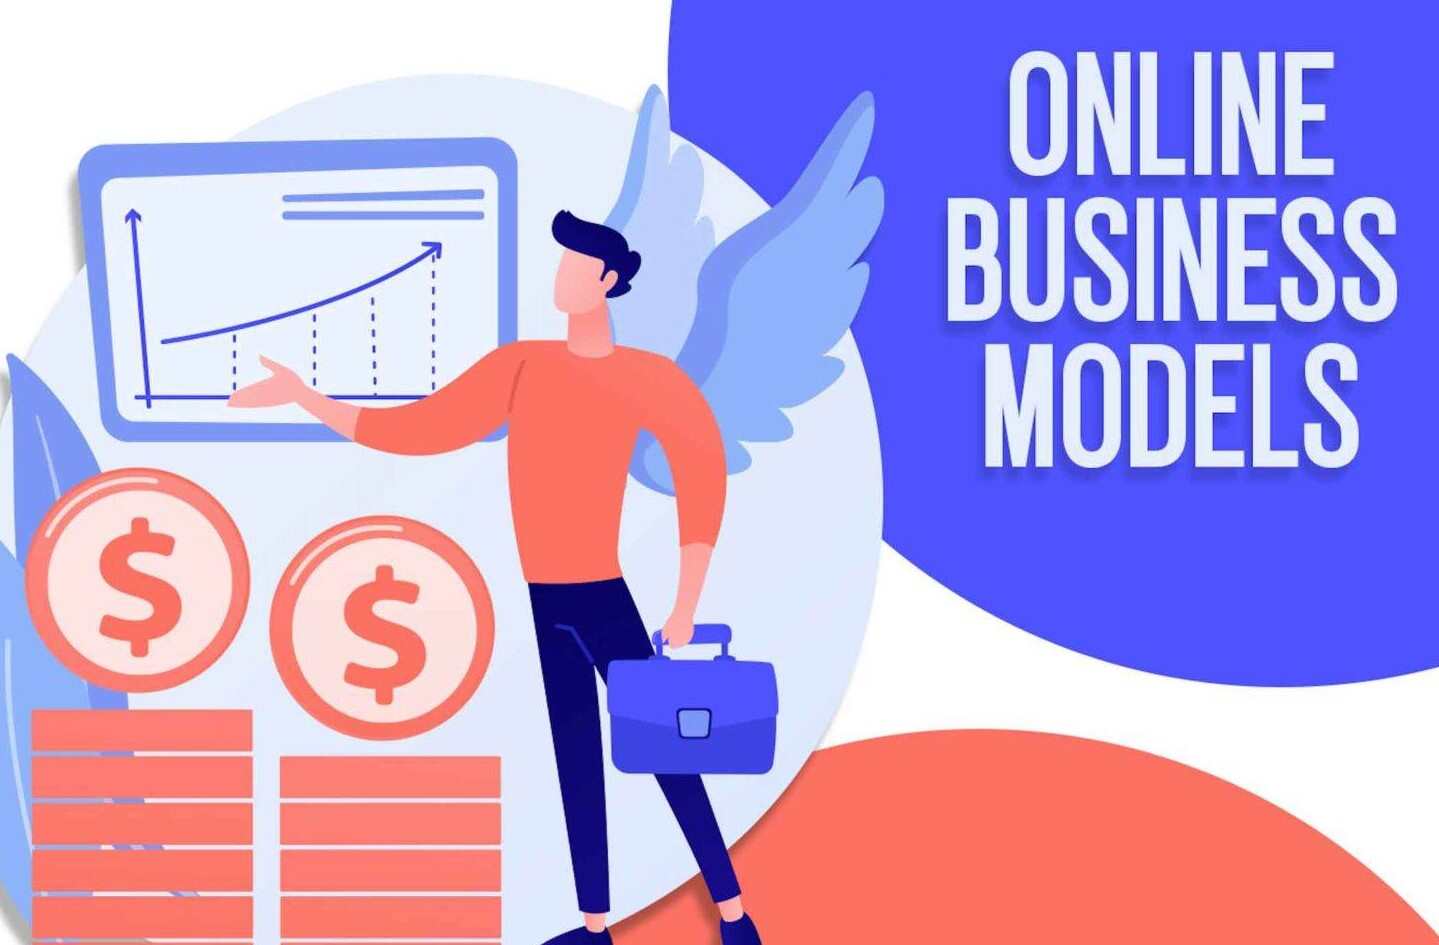 Online Business Model for Small Businesses